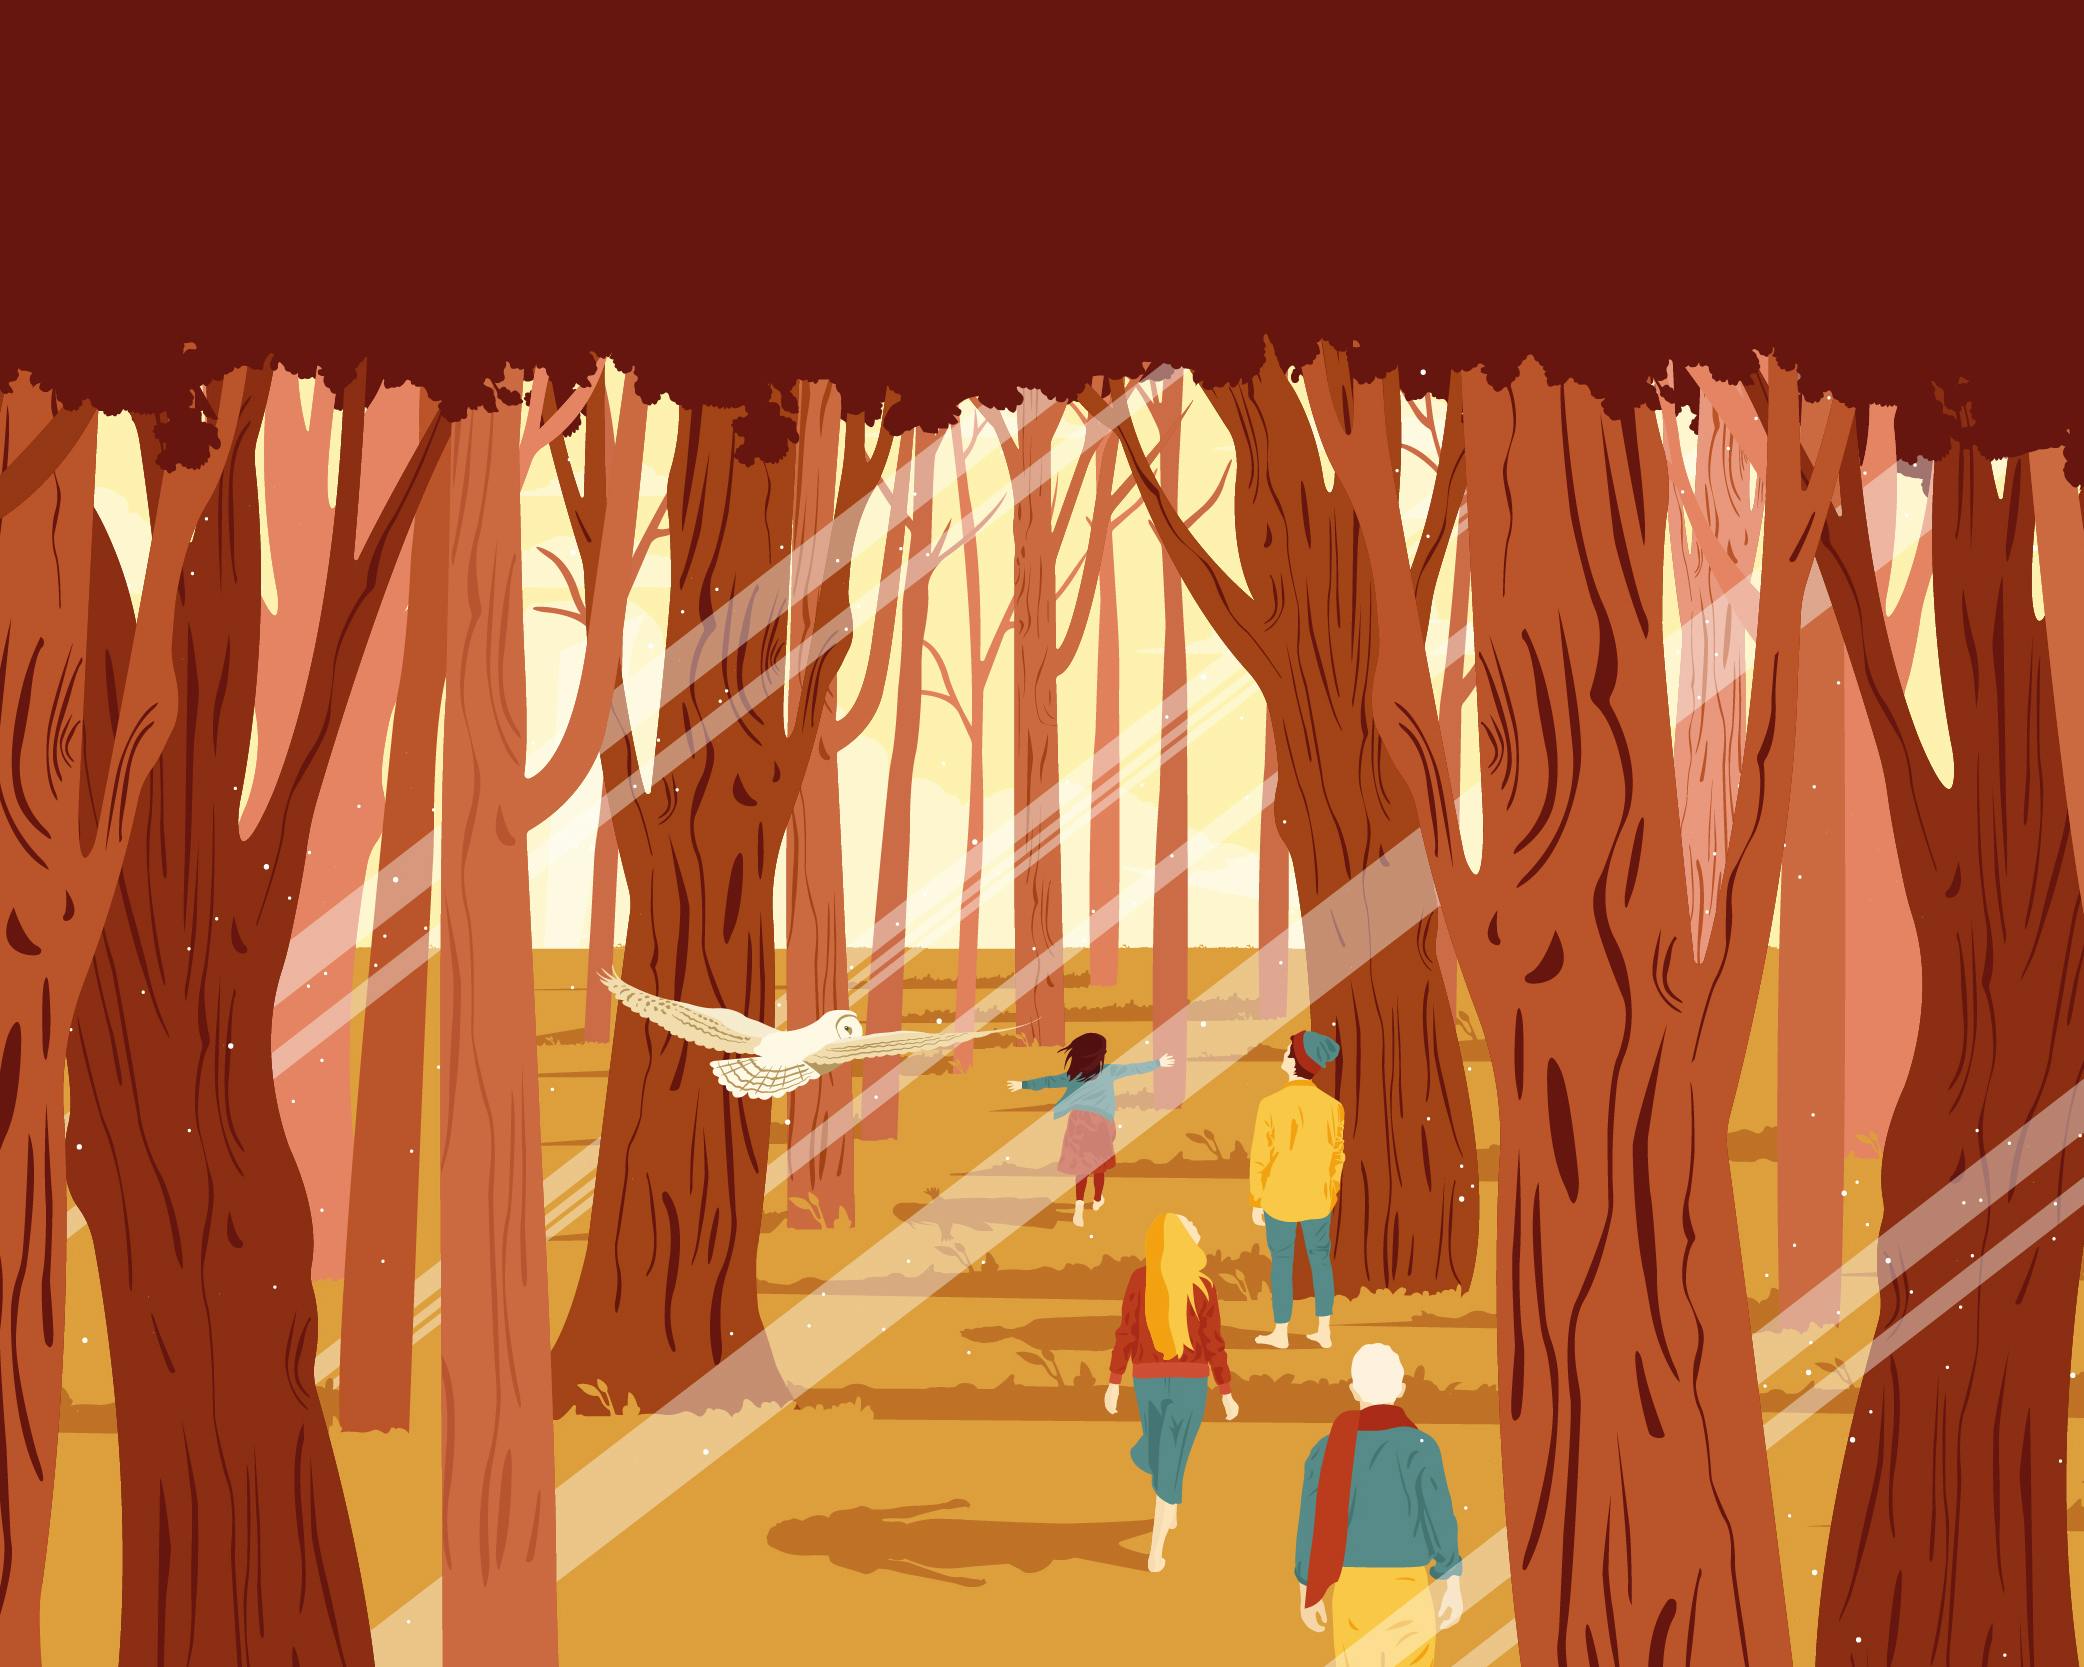 Graphic representing the forest with people walking, dominant colors are orange and red